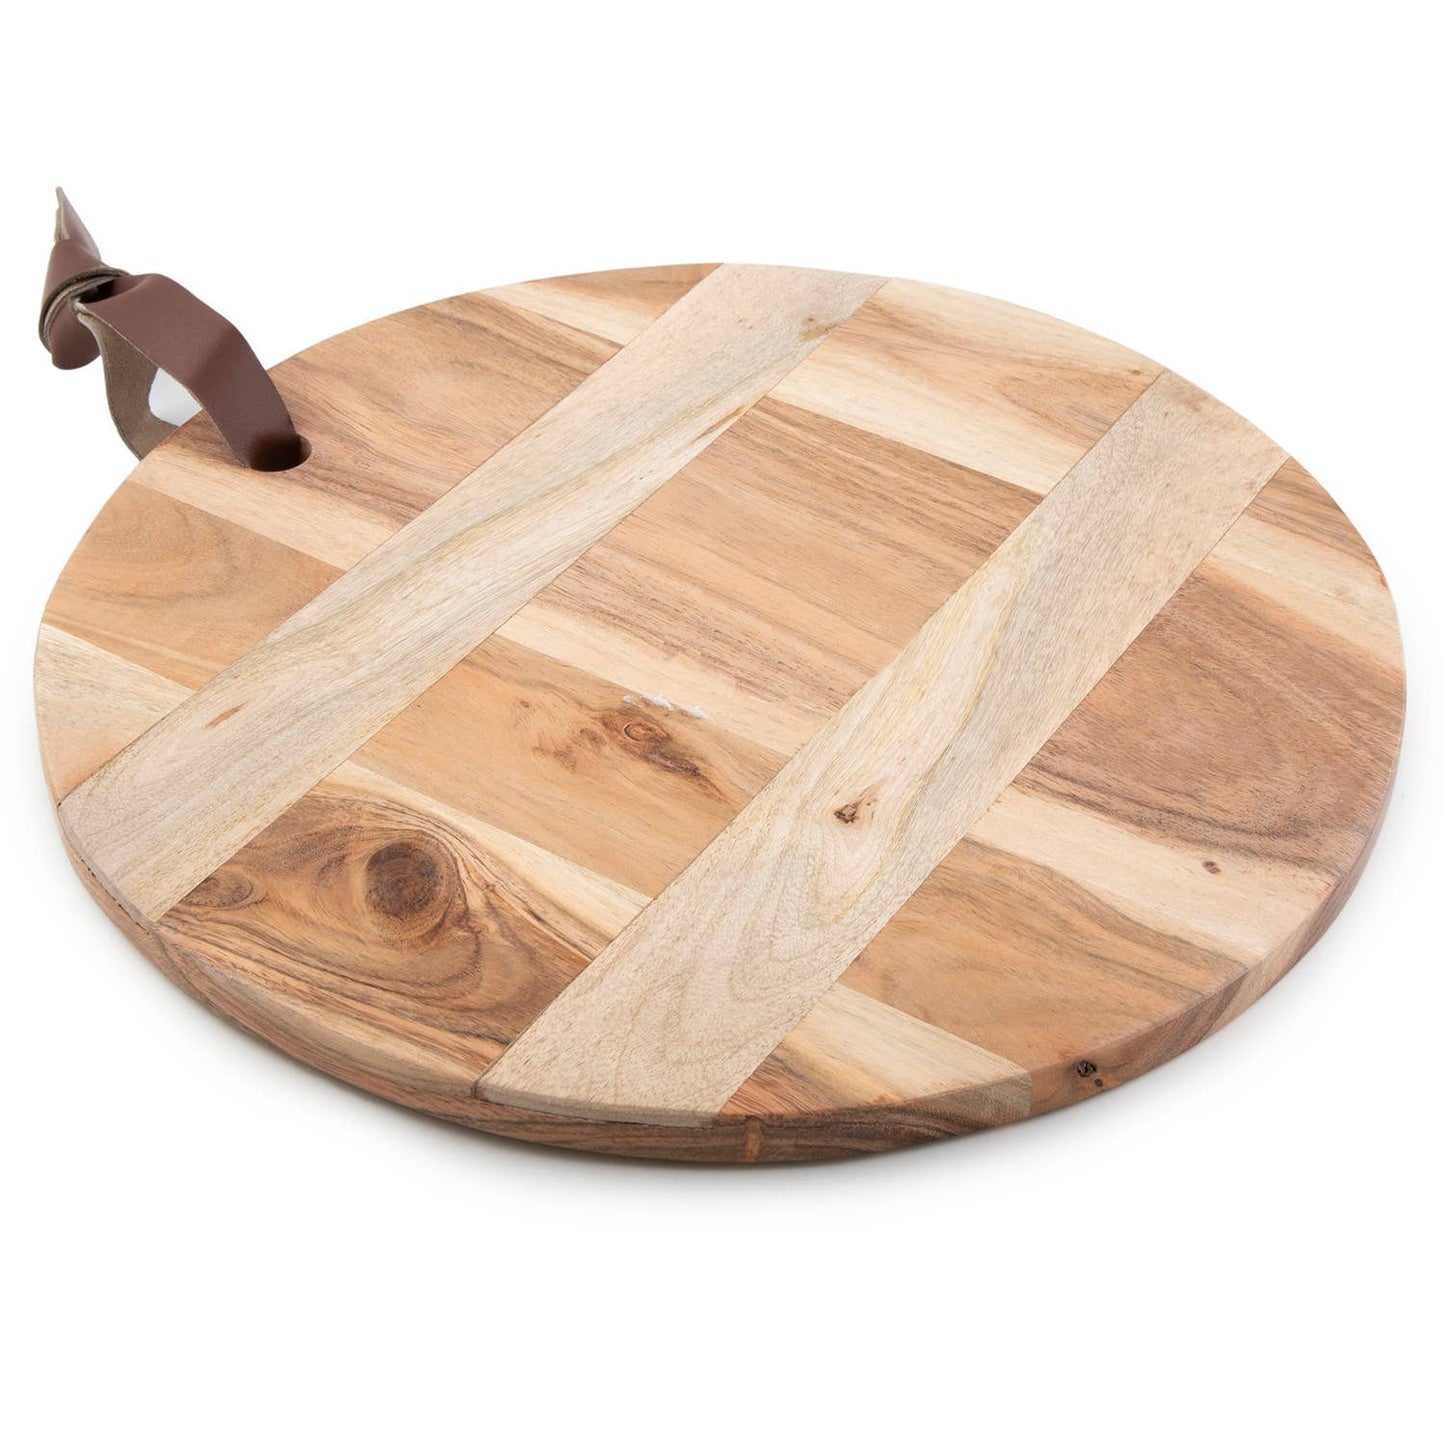 CounterArt and Highland Home - Decorative Round Mixed Wood Serving Tray